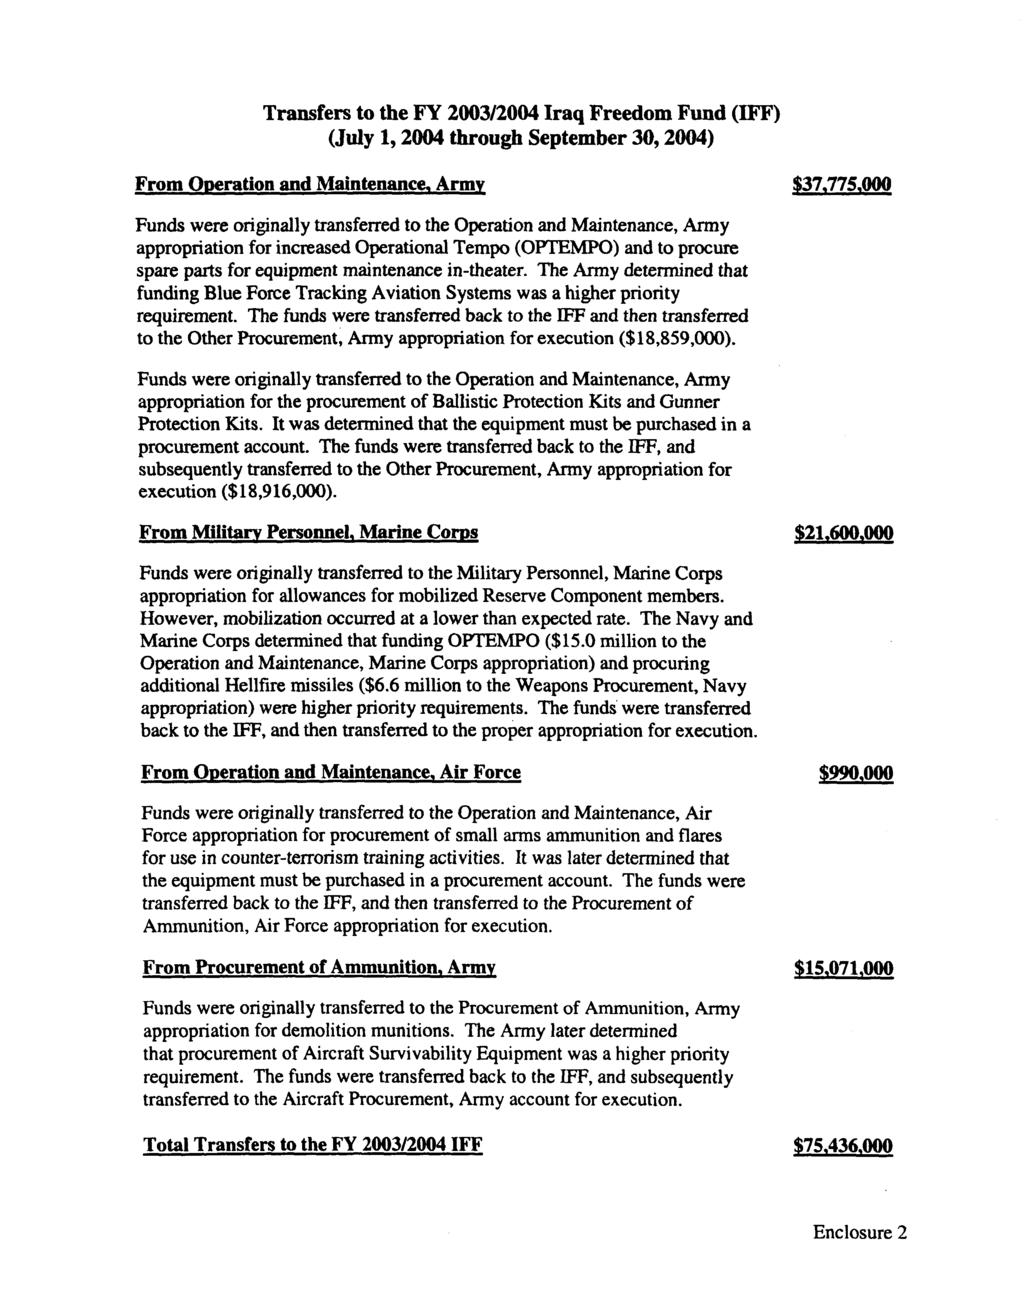 Transfers to the FY 2003/2004 Iraq Freedom Fund (IFF) (July 1, 2004 through September 30, 2004) From Operation and Maintenance, Army $37,775,000 Funds were originally transferred to the Operation and